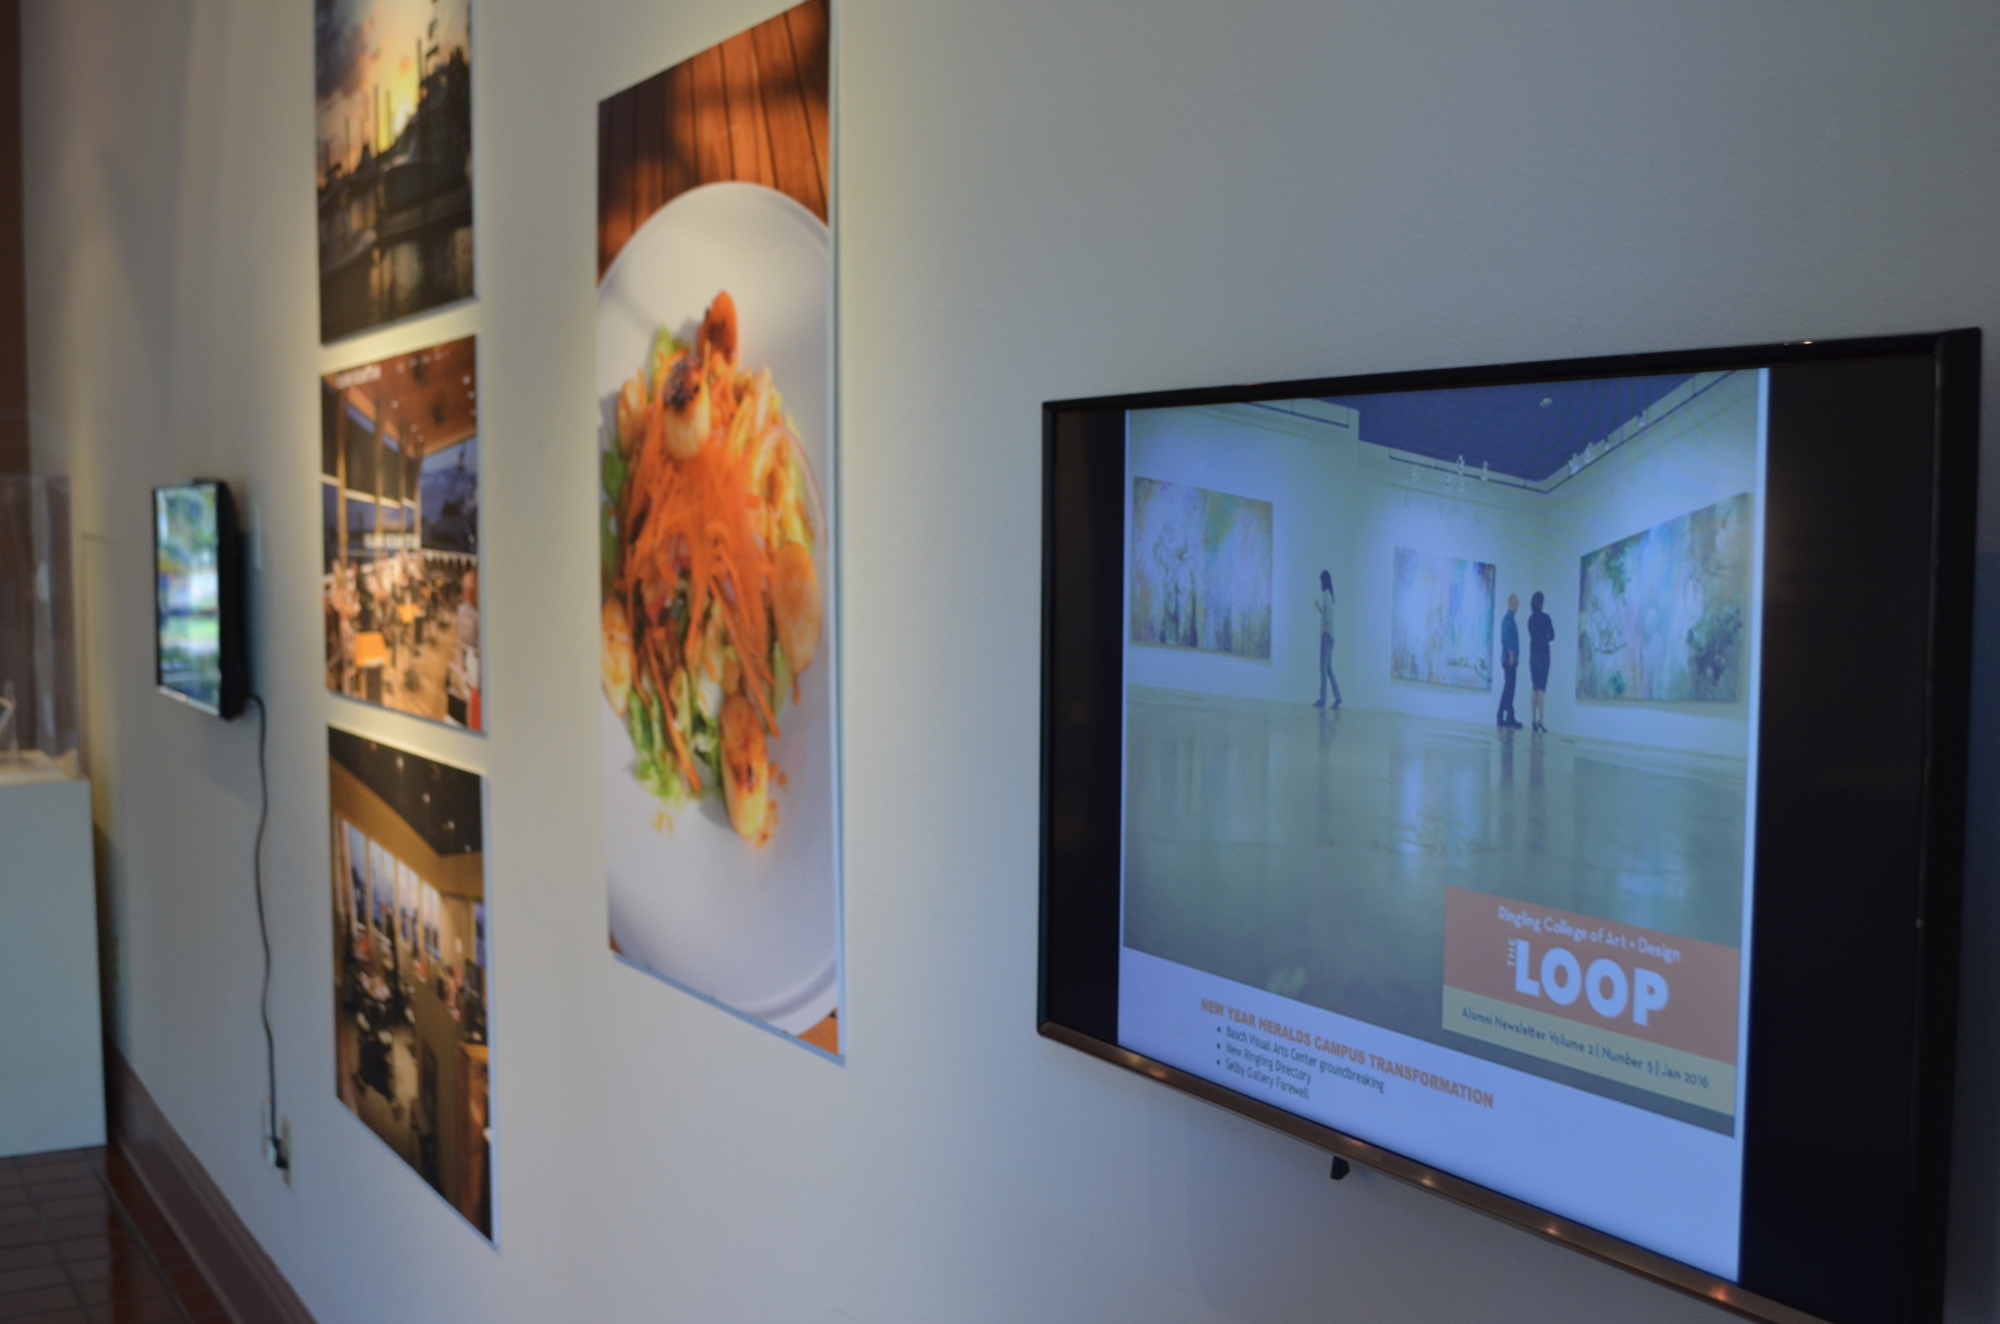 Examples of various campaigns created by Nuevo Advertising Group. The TV screens display projects that Pérez created or programmed for Ringling College of Art and Design, and the photos were part of a print and digital project for Ocean Star restaurant.